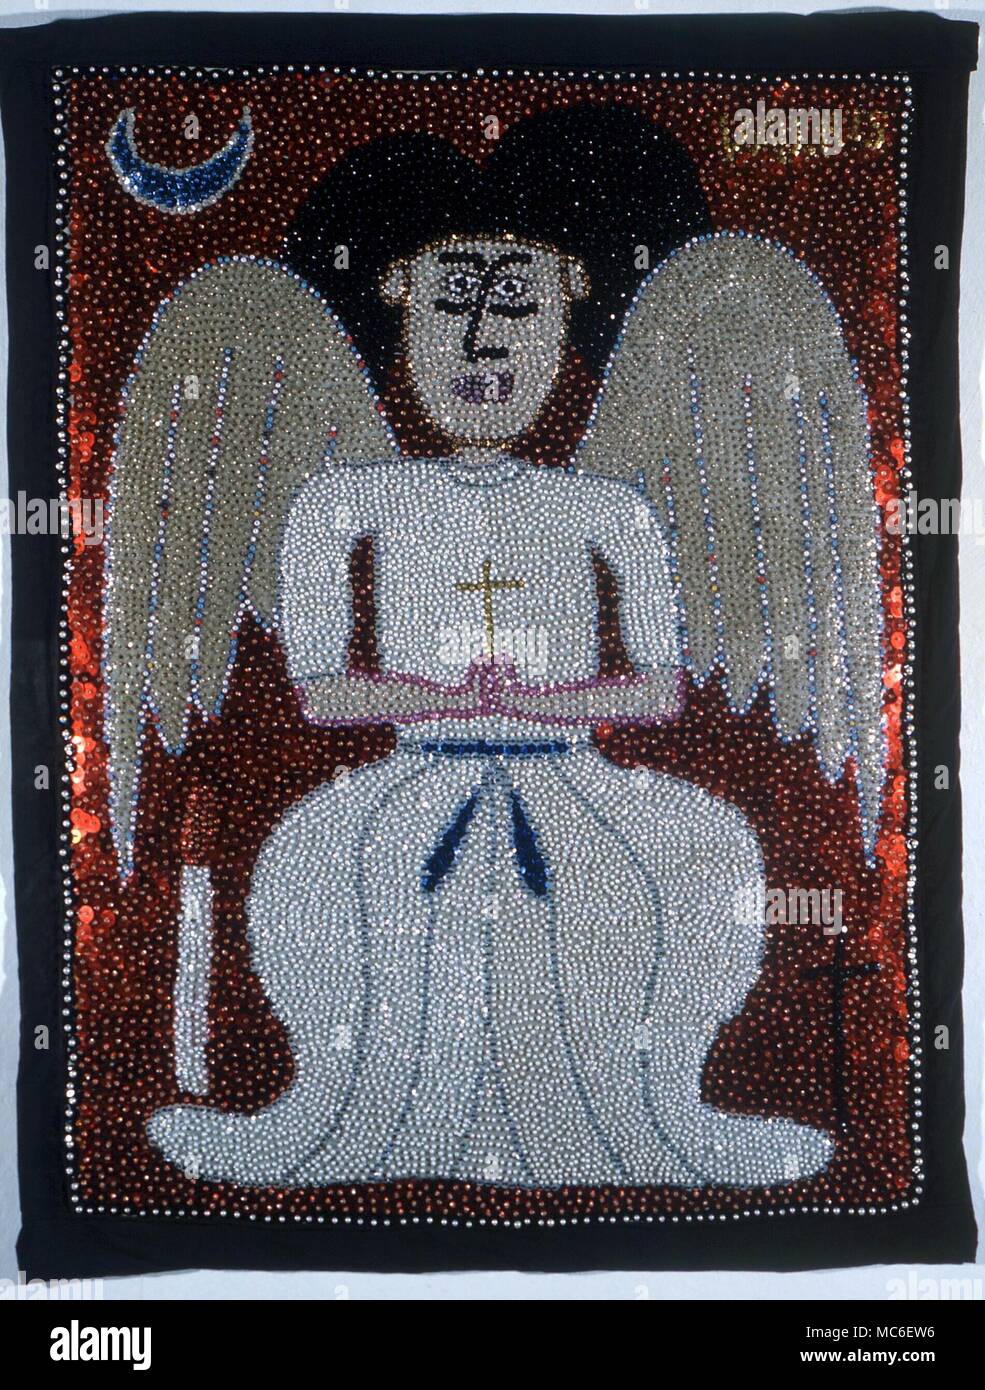 ANGELS - Voodoo Art Voodoun altar cloth depicting an angel with the moon. By Vacris, 1994, 'Angel' Stock Photo